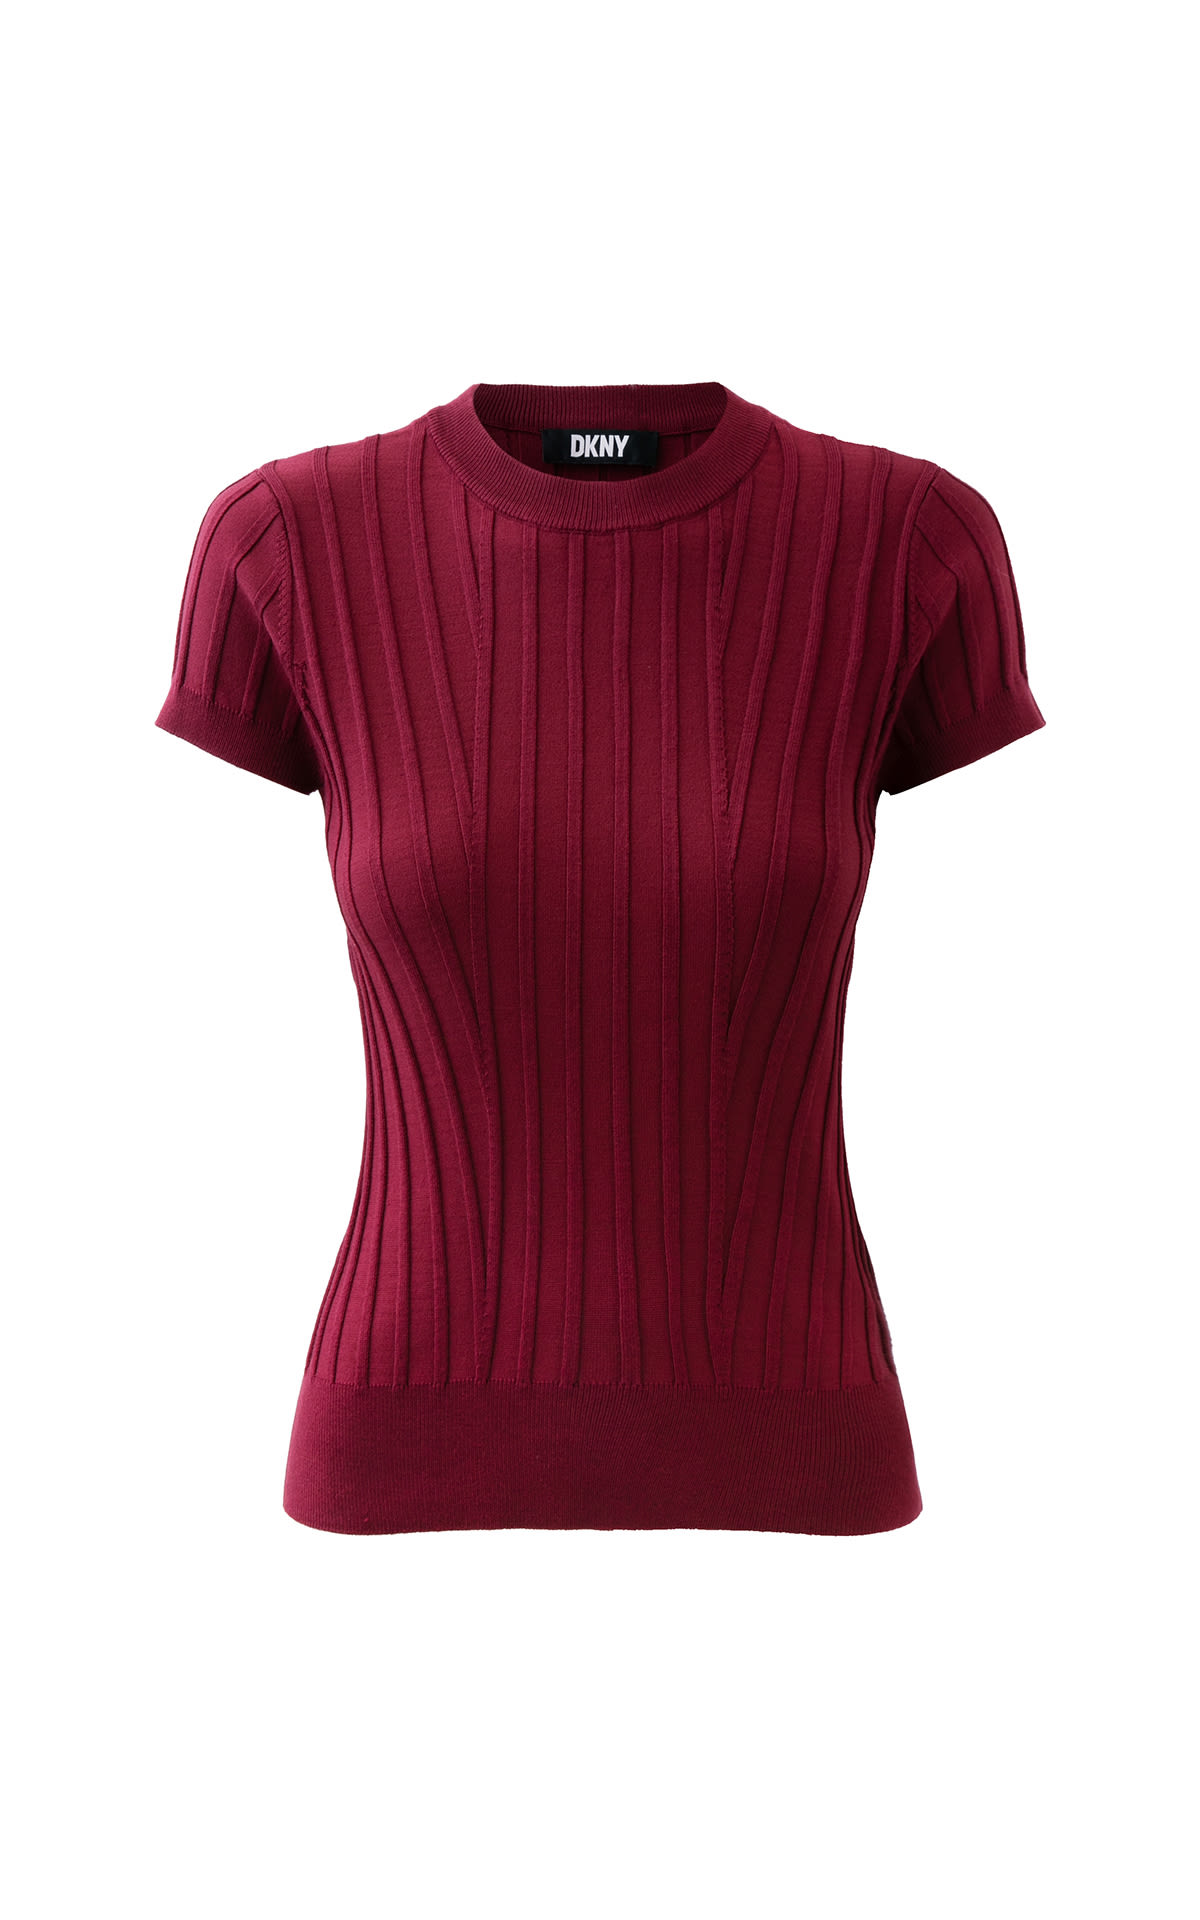 DKNY Short sleeve rib knit top from Bicester Village